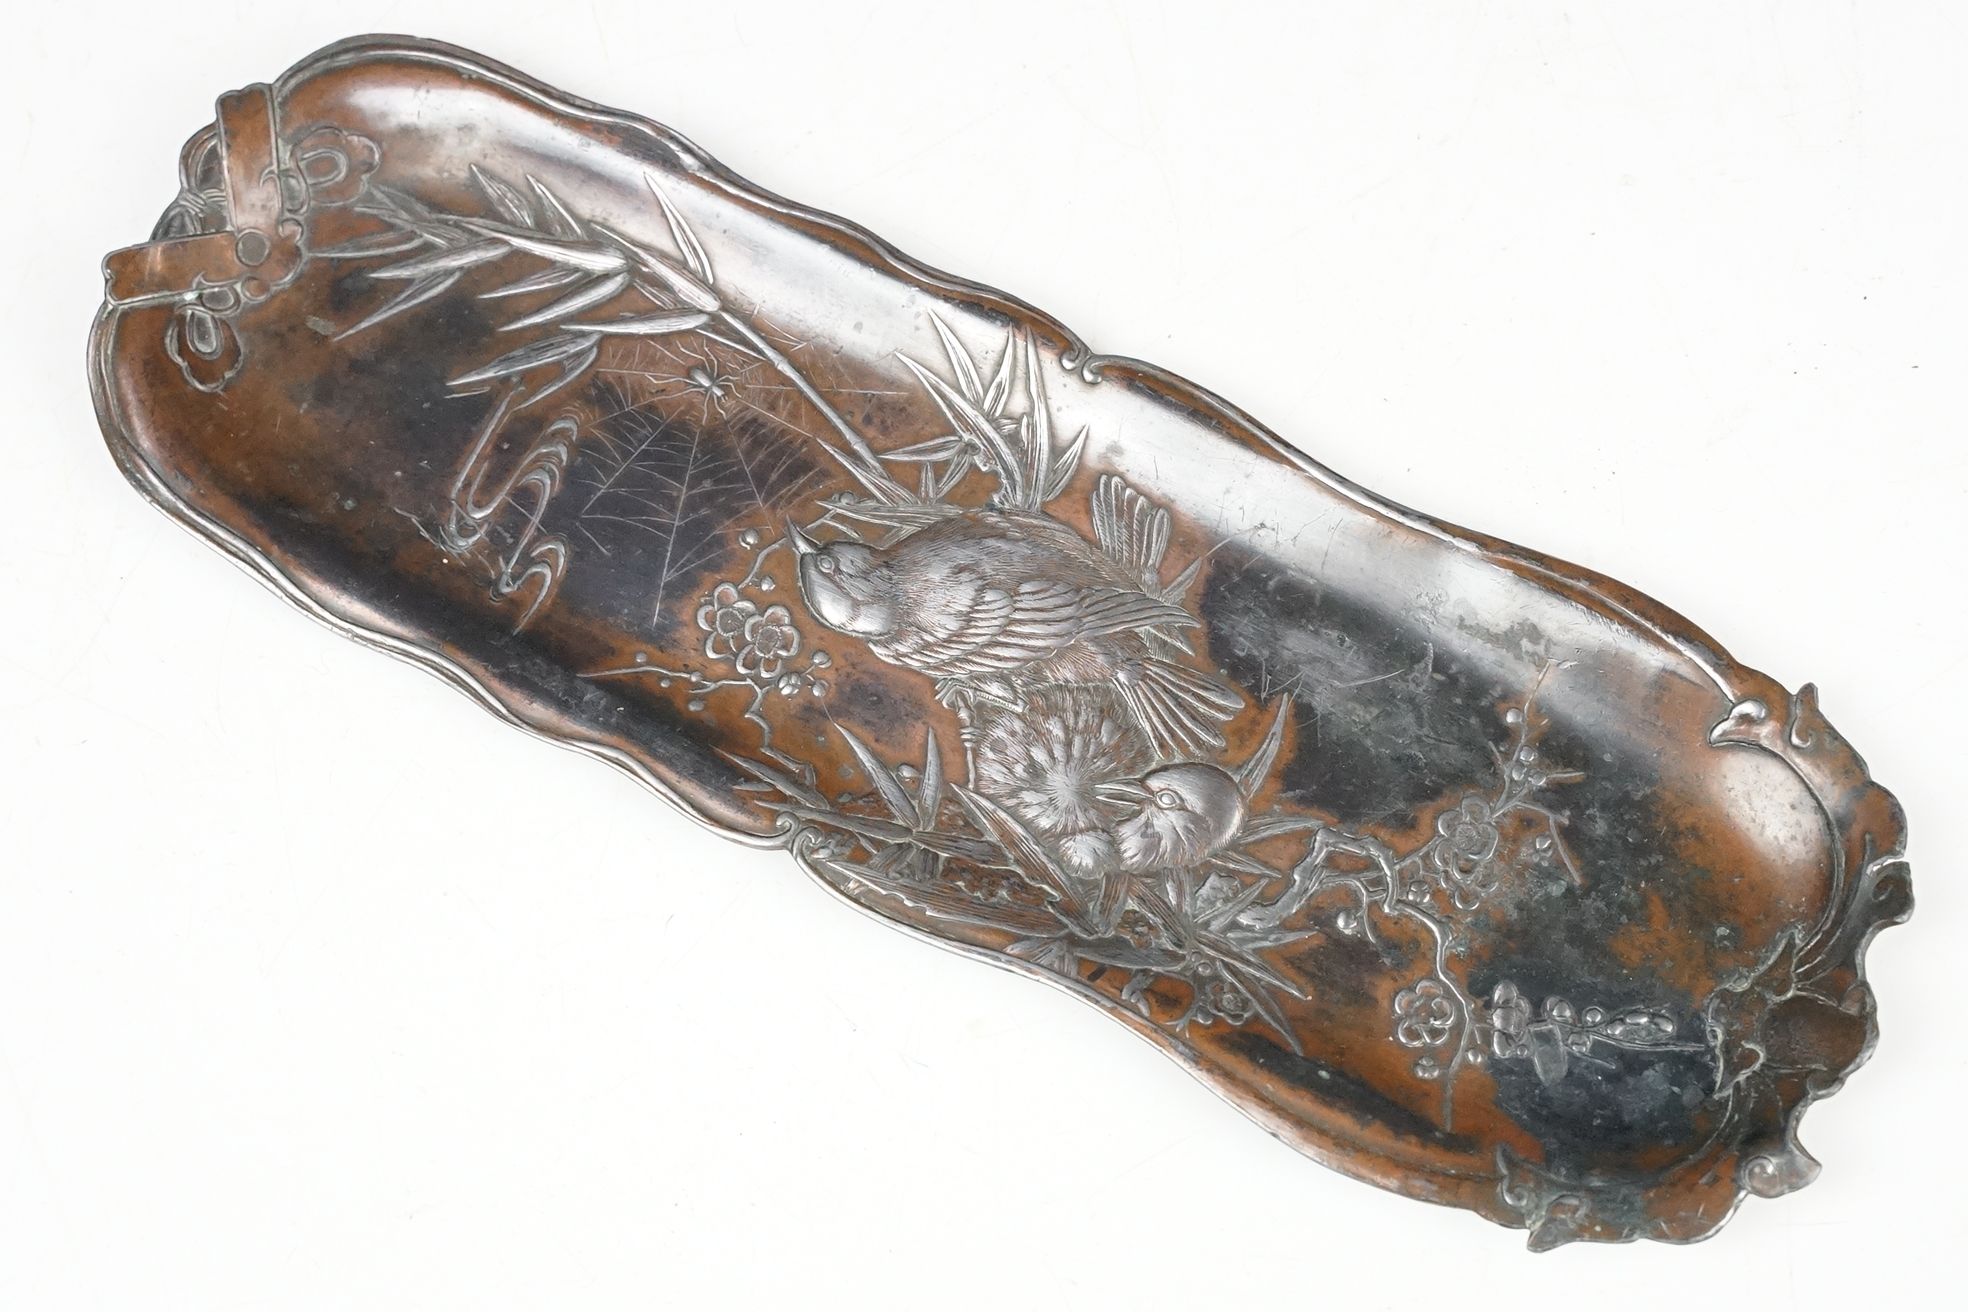 Japanese Meiji period bronzed and silvered Pen Tray decorated with birds and spider with web amongst